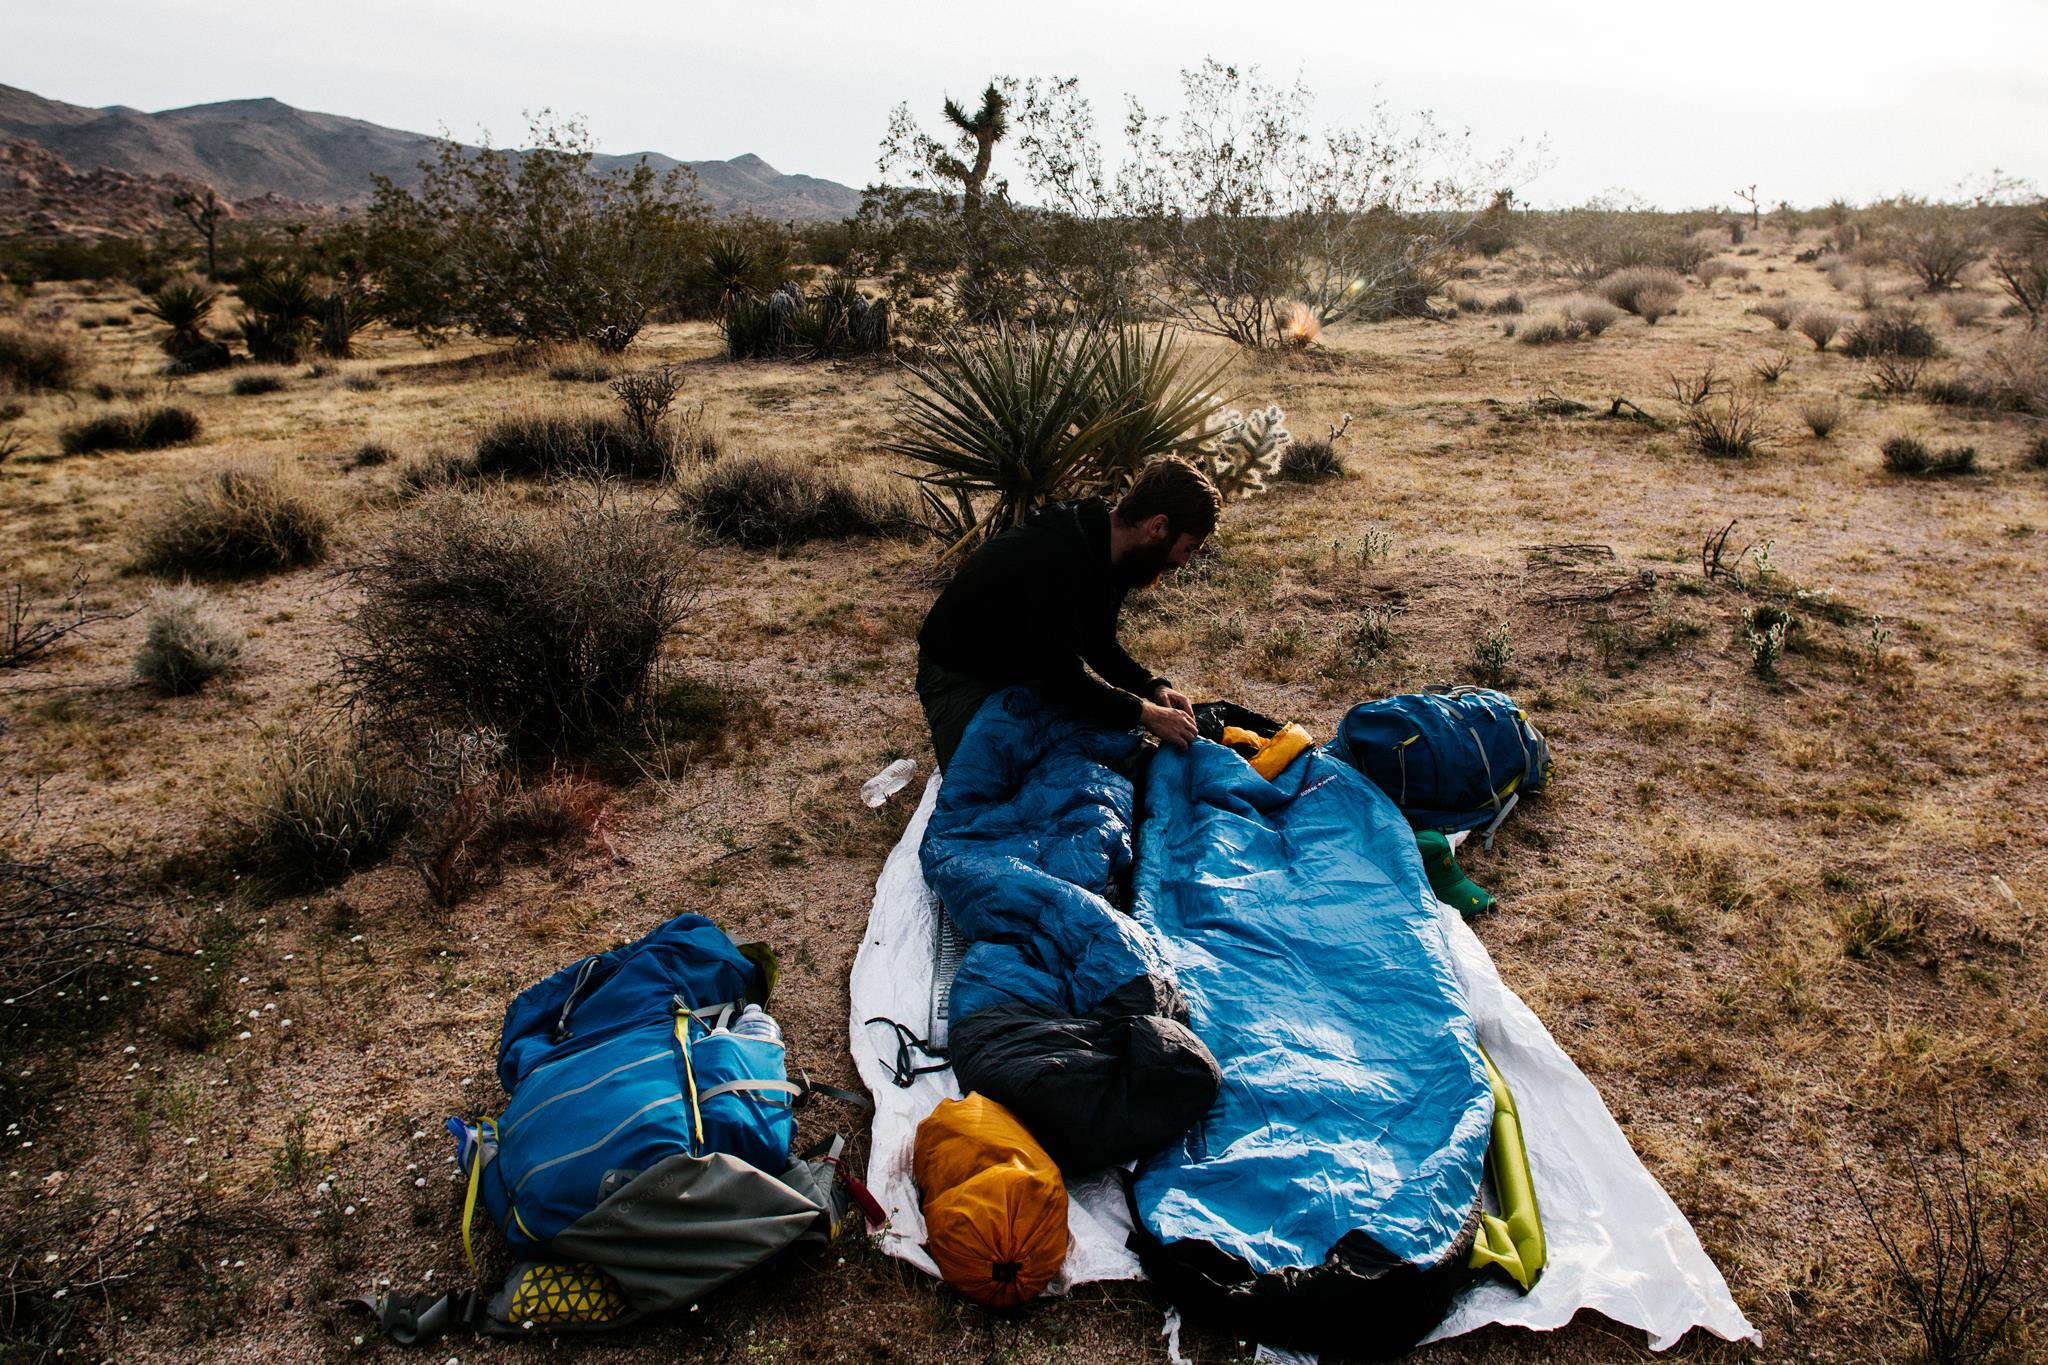 How To Find The Perfect Sleeping Bag